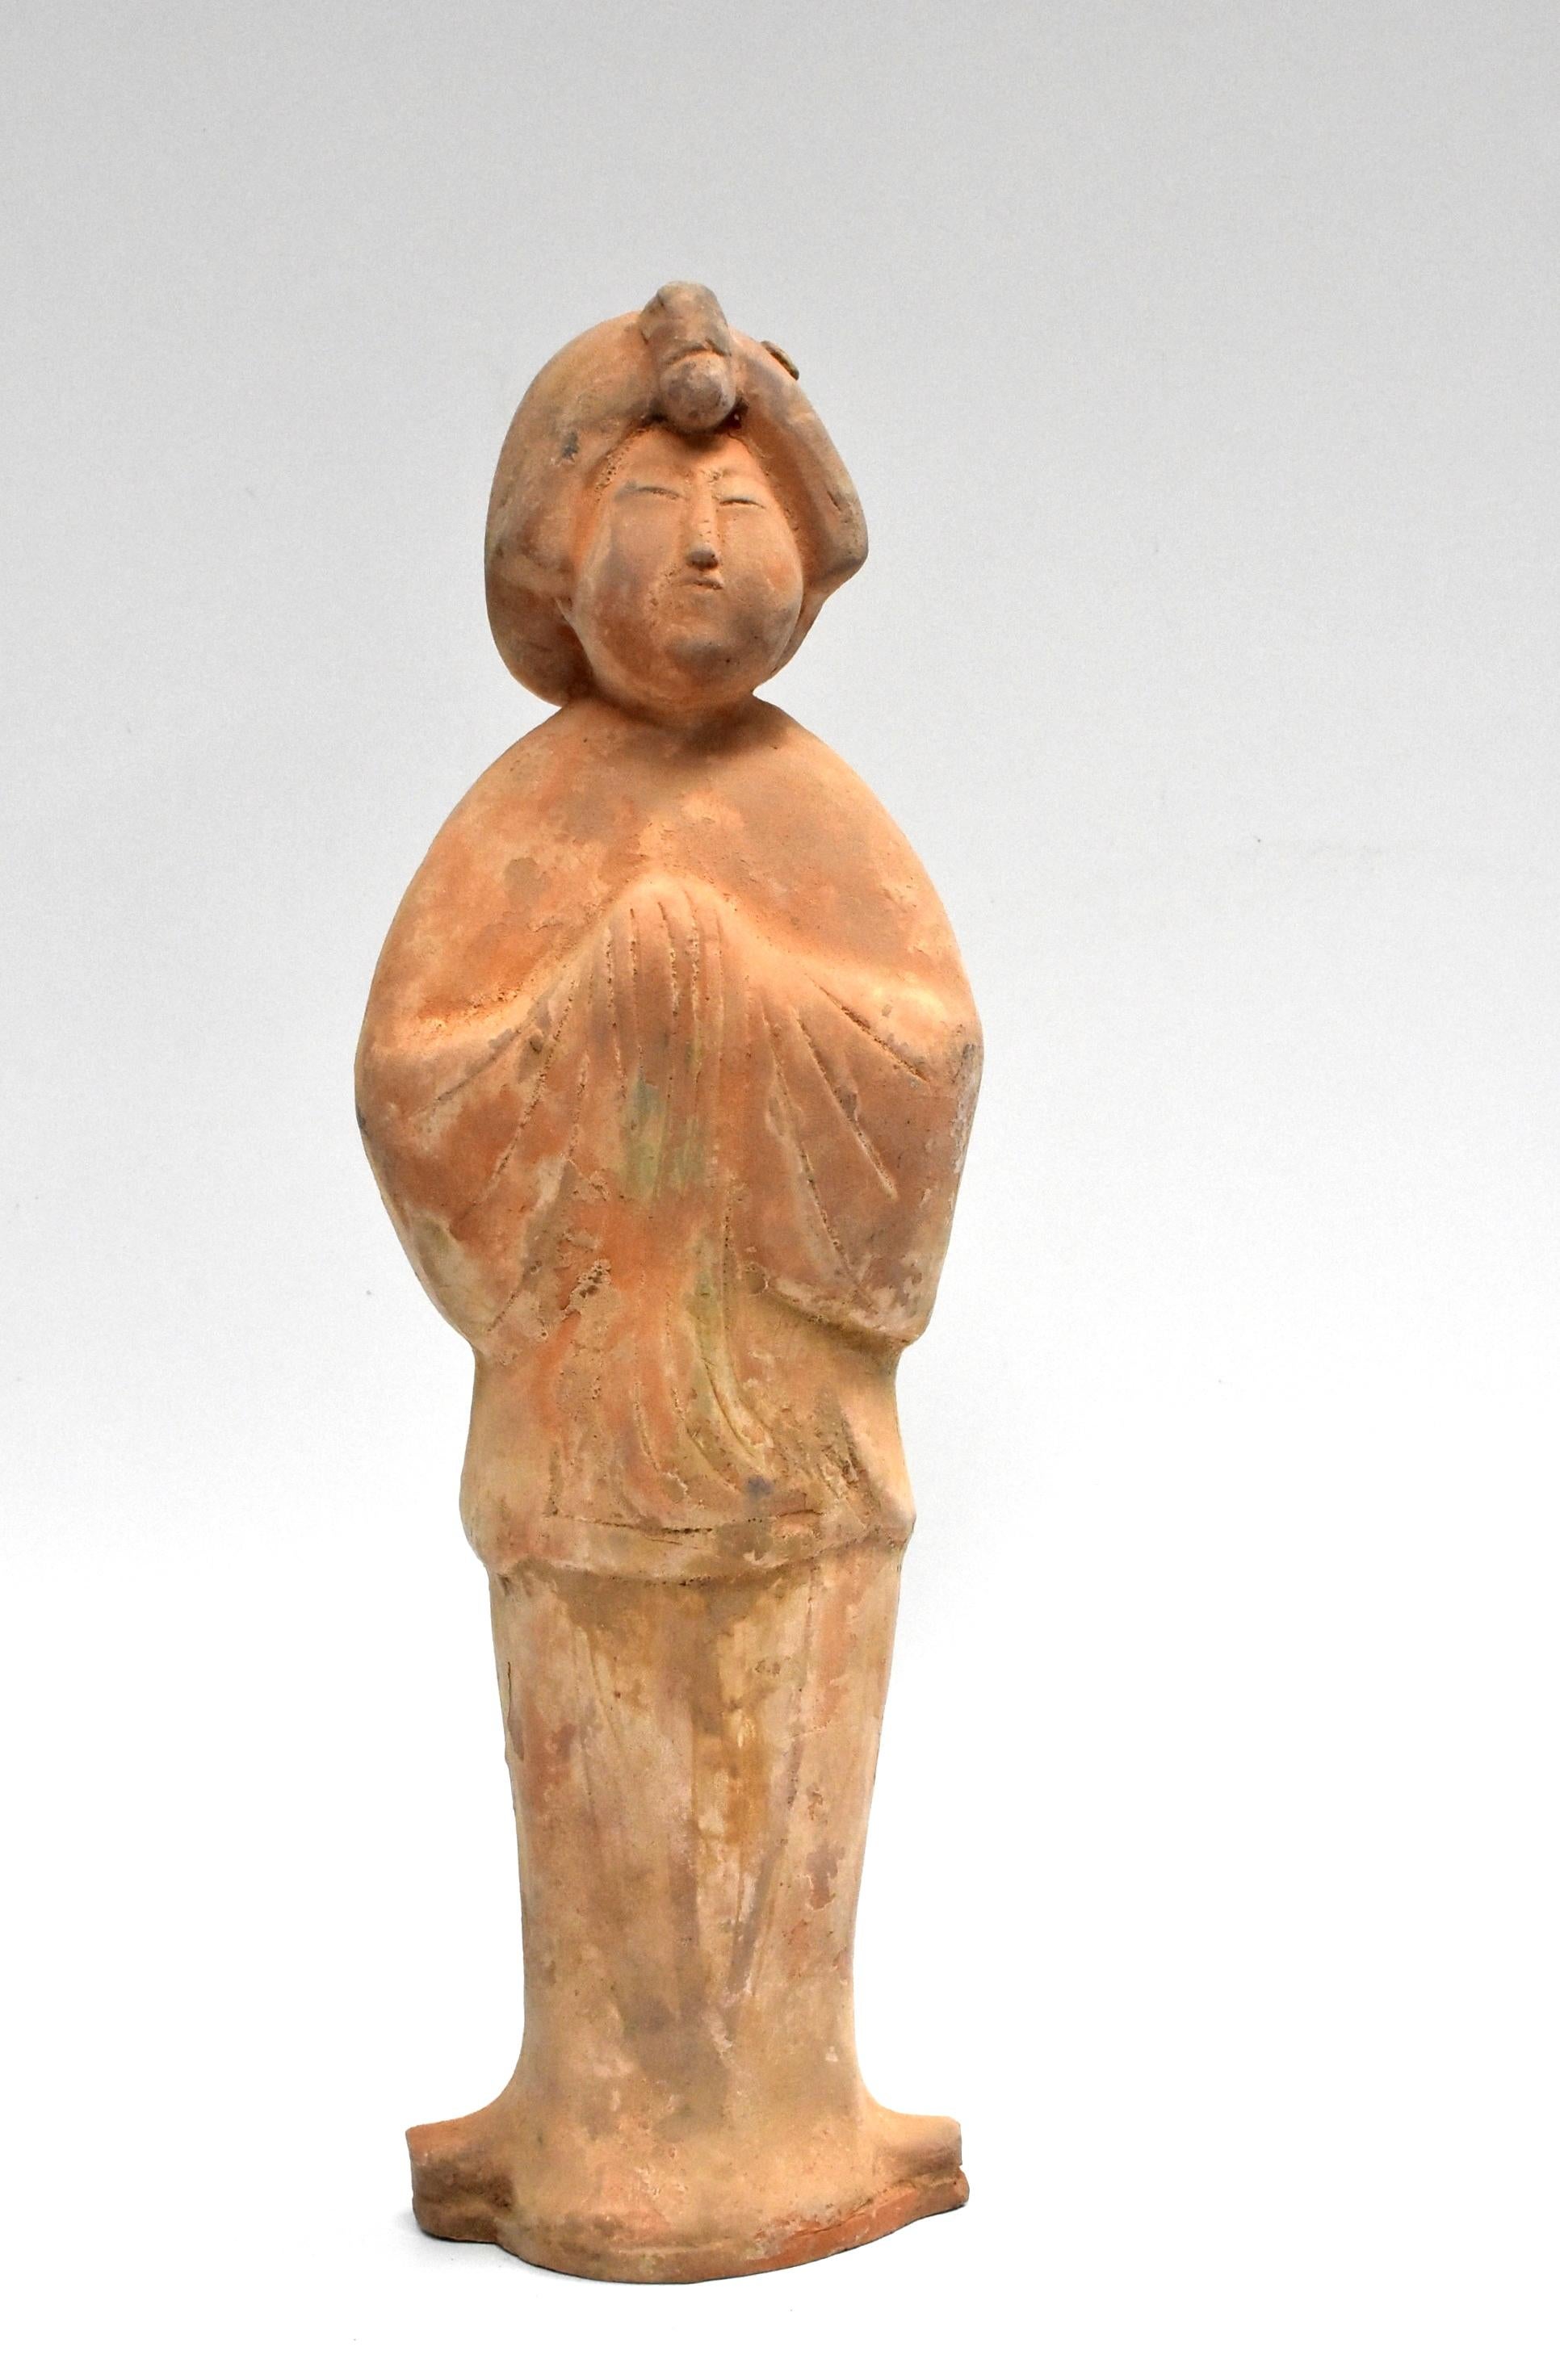 A great example of Chinese Tang dynasty pottery figure. The figure is a court lady, with a full face and traditional hair style. She stand with both hands in front. Her face tilts up slightly and has an empathetic expression.